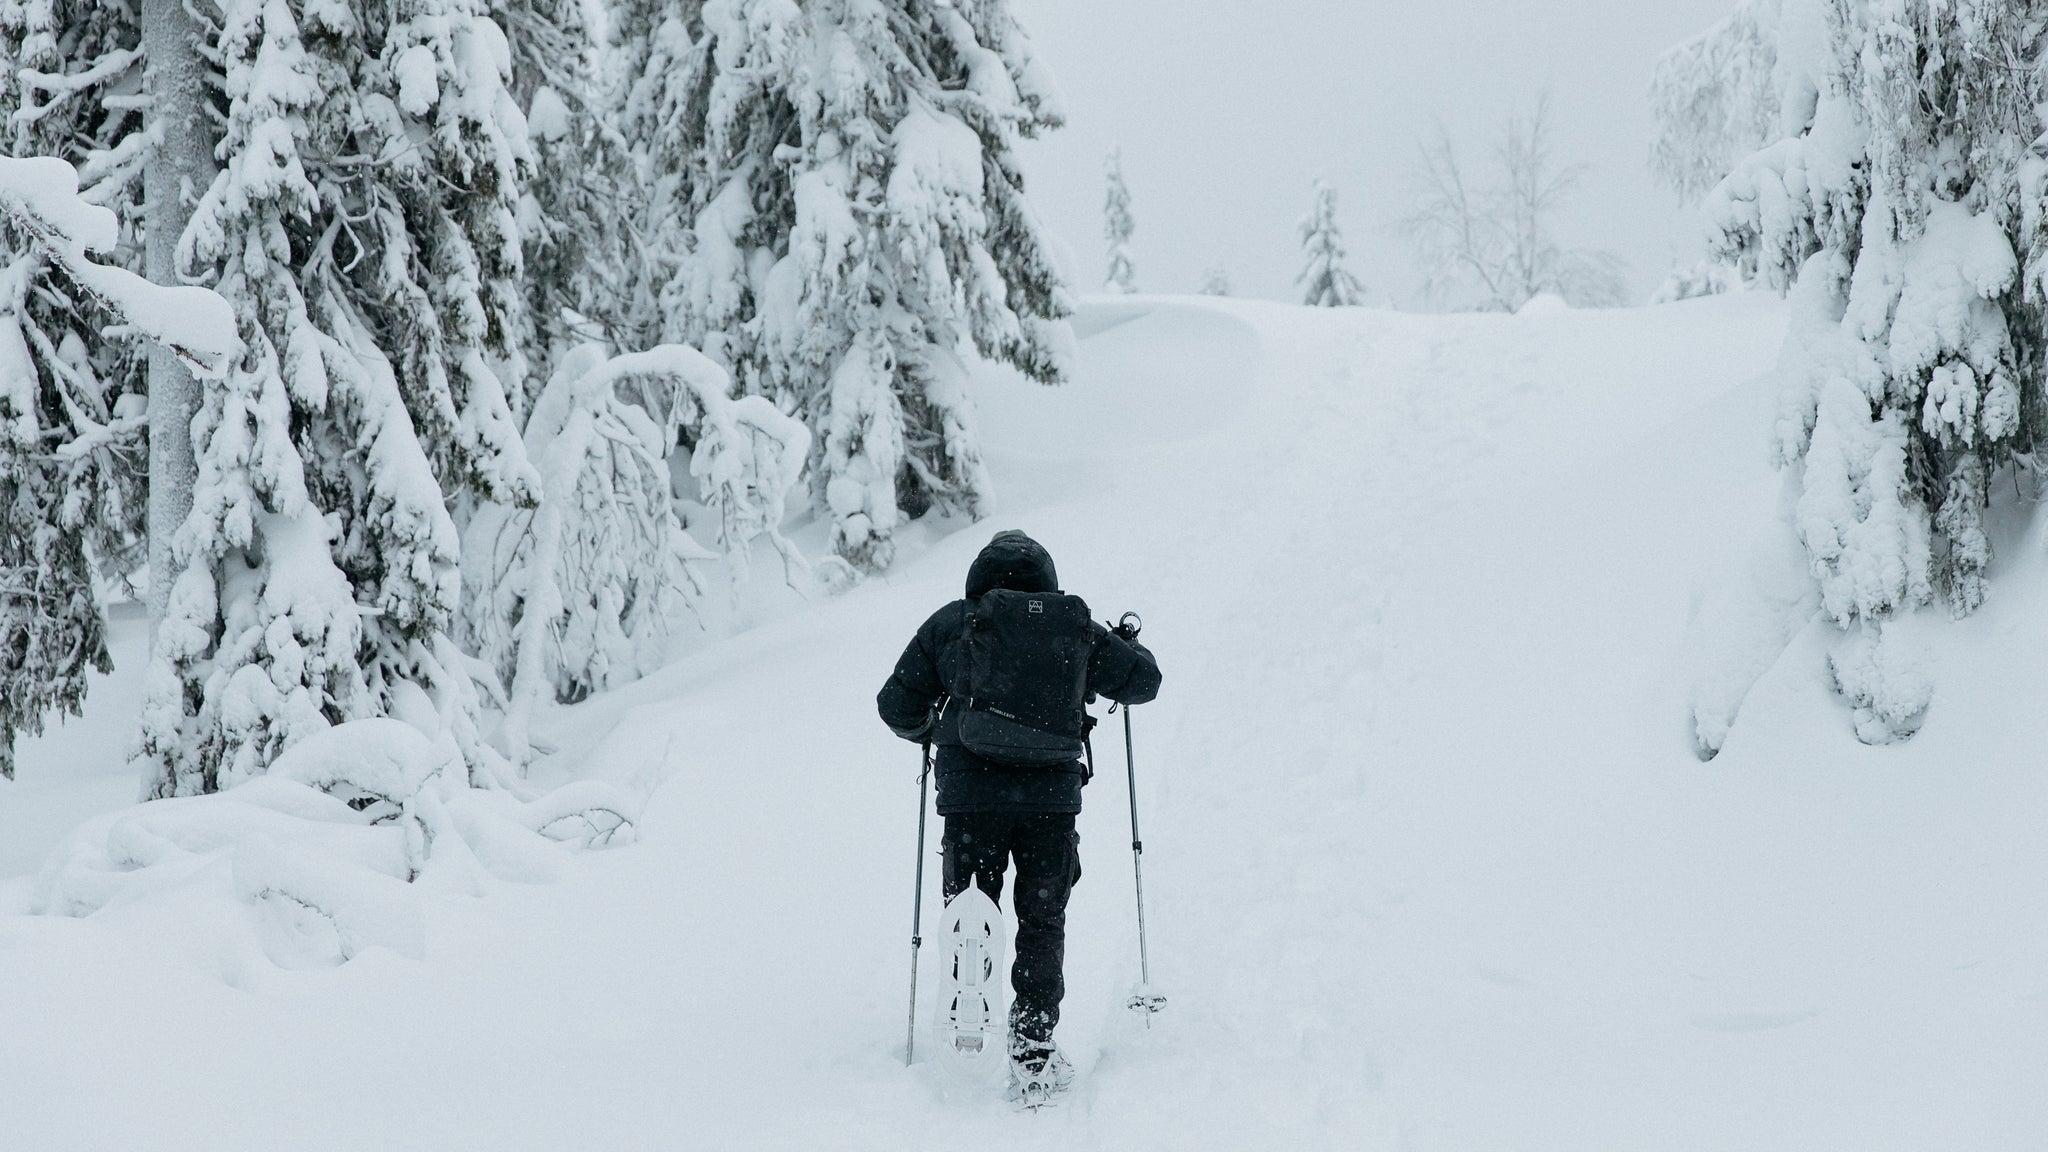 A man walking through the snow holding ski poles and wearing a black backpack